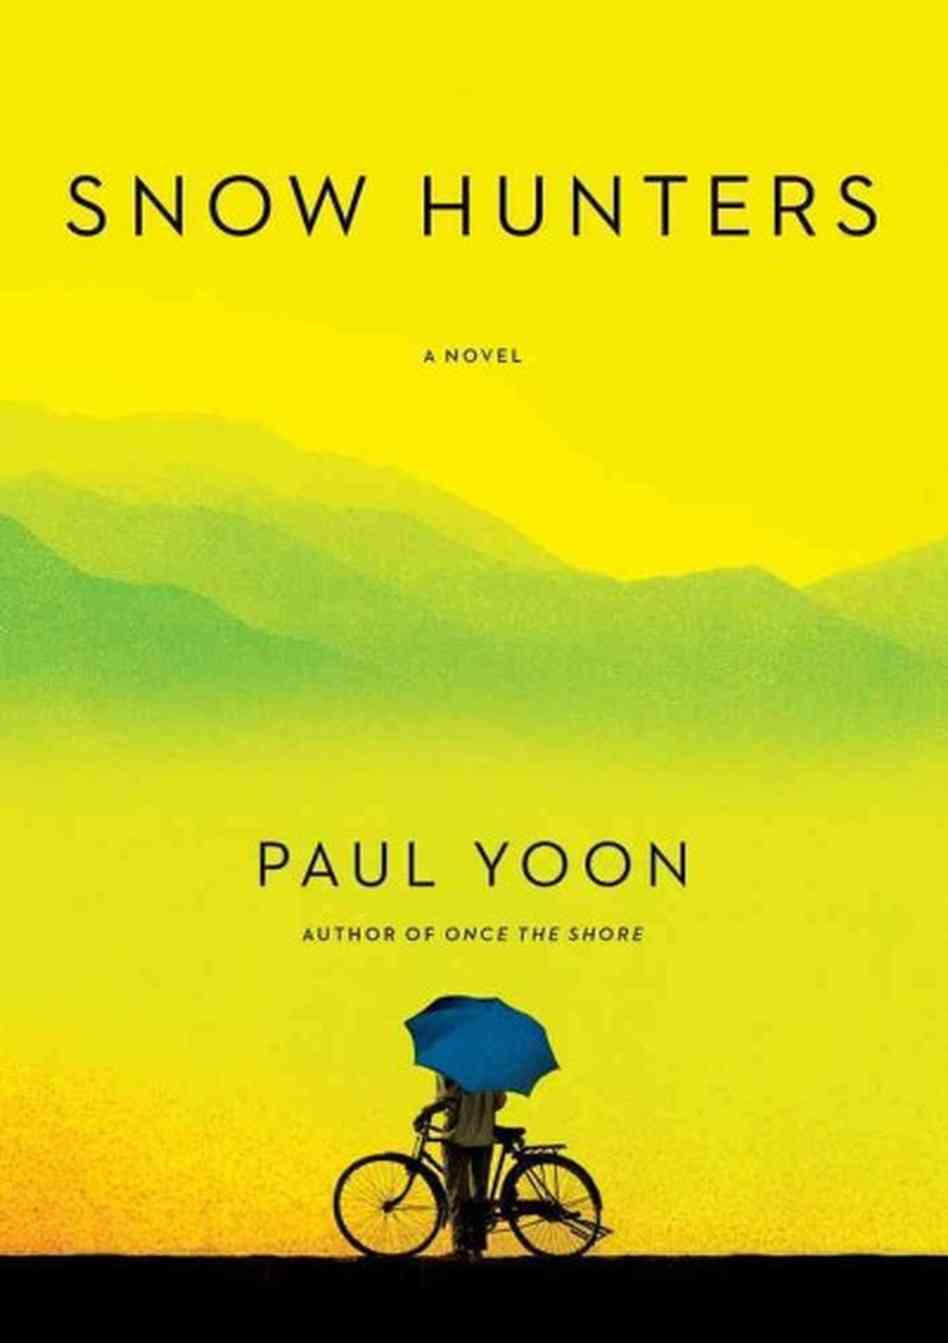 http://discover.halifaxpubliclibraries.ca/?q=title:snow hunters author:yoon